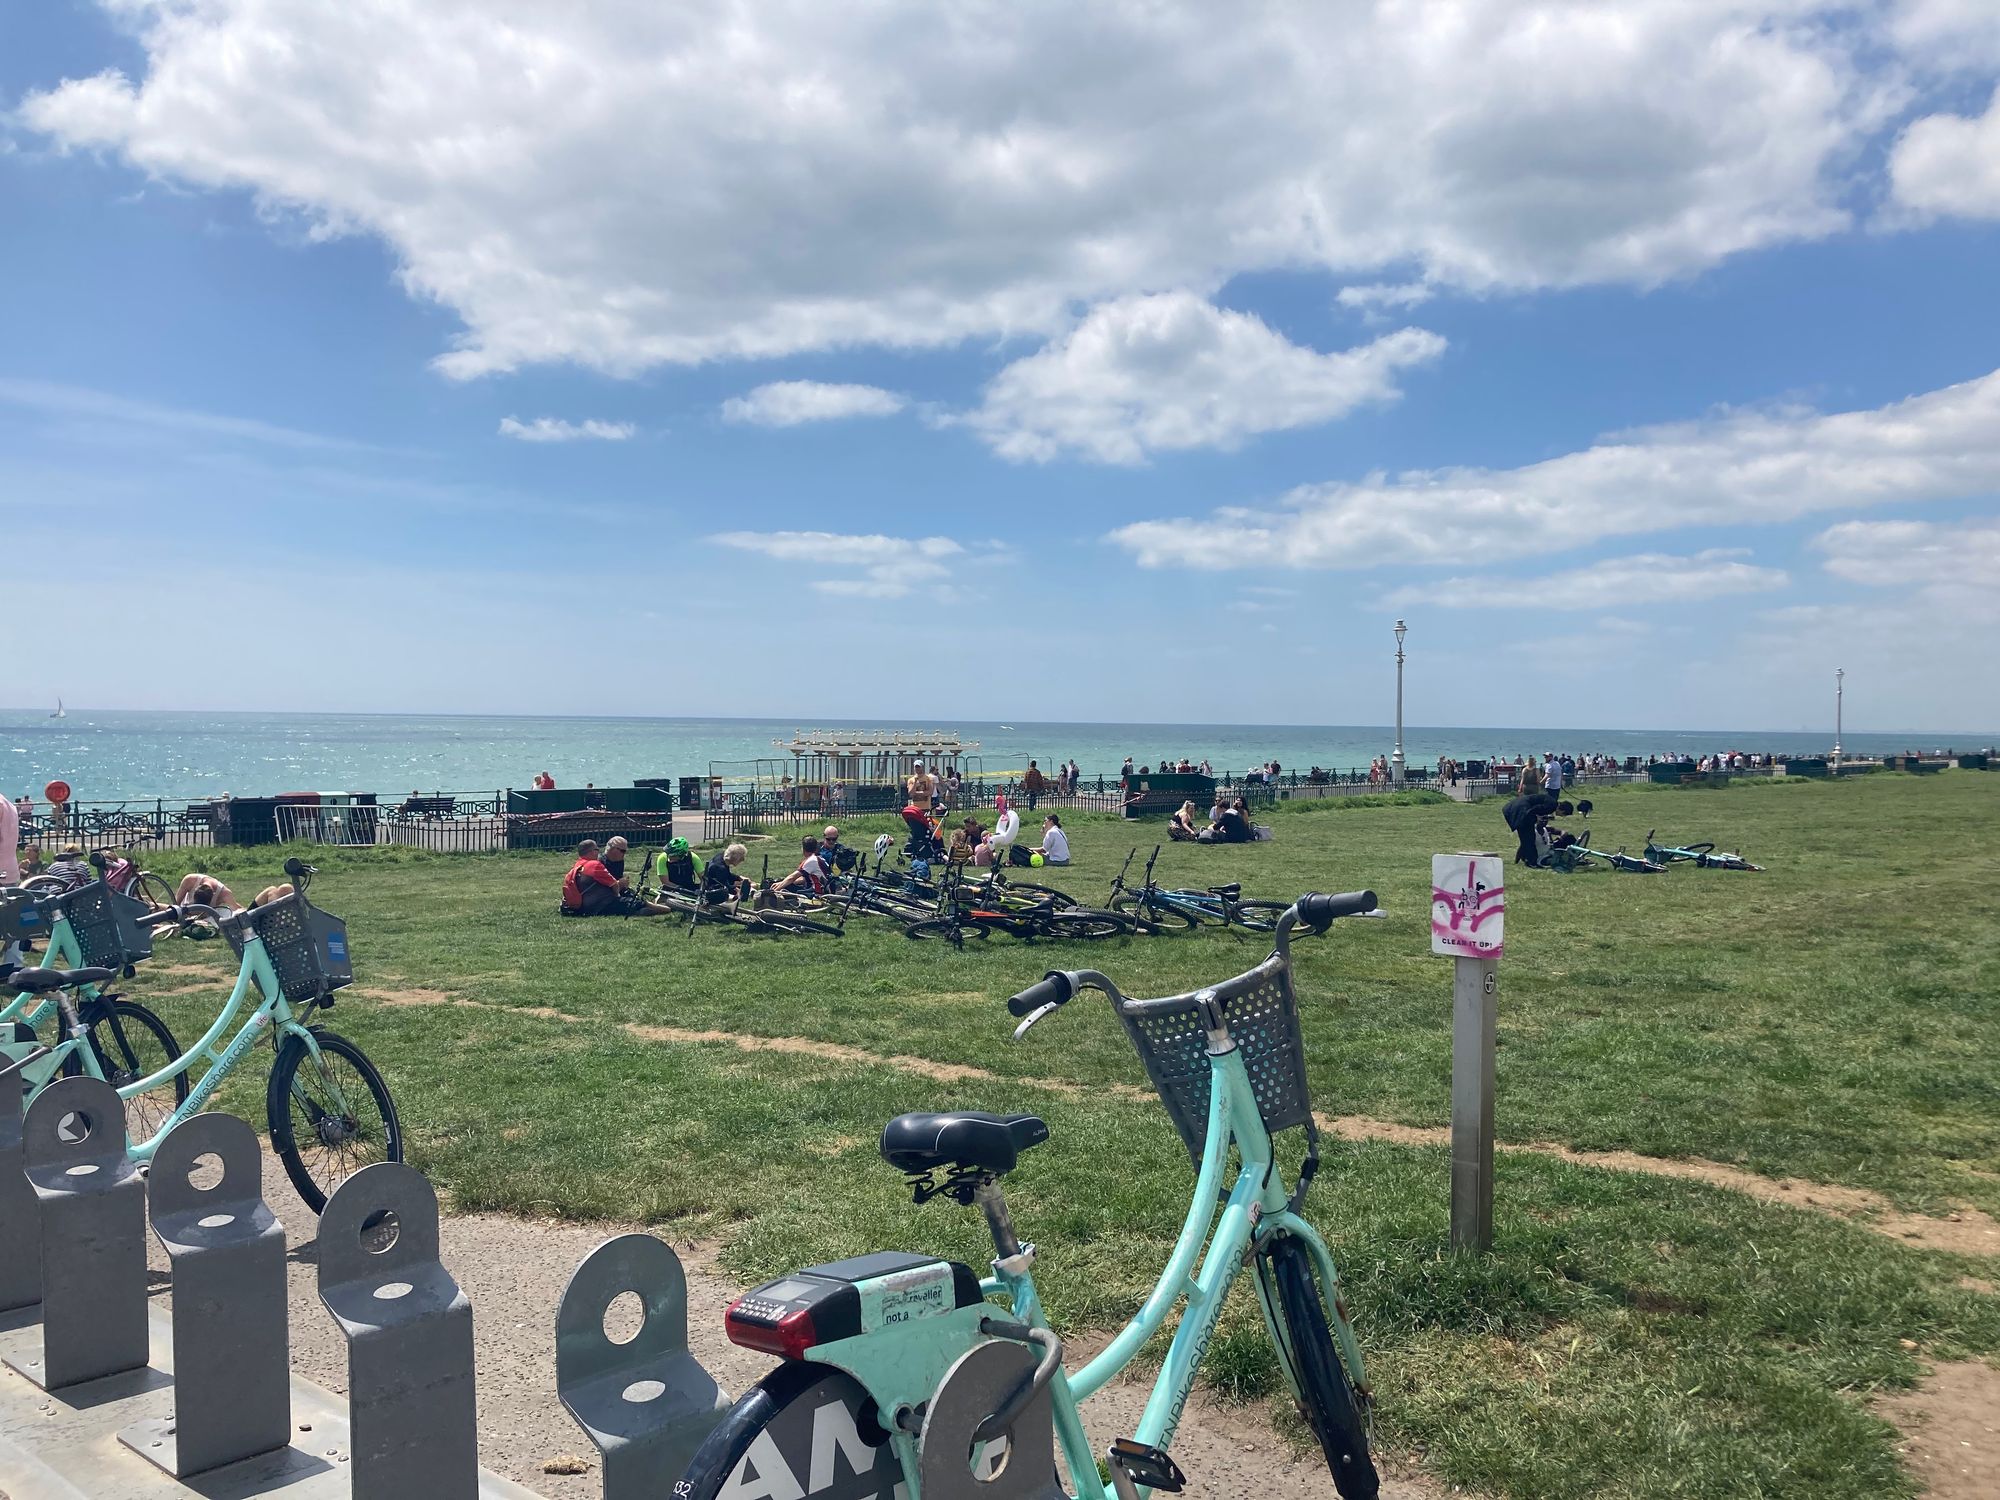 A picture of some of the BikeShare bikes by Hove Lawns